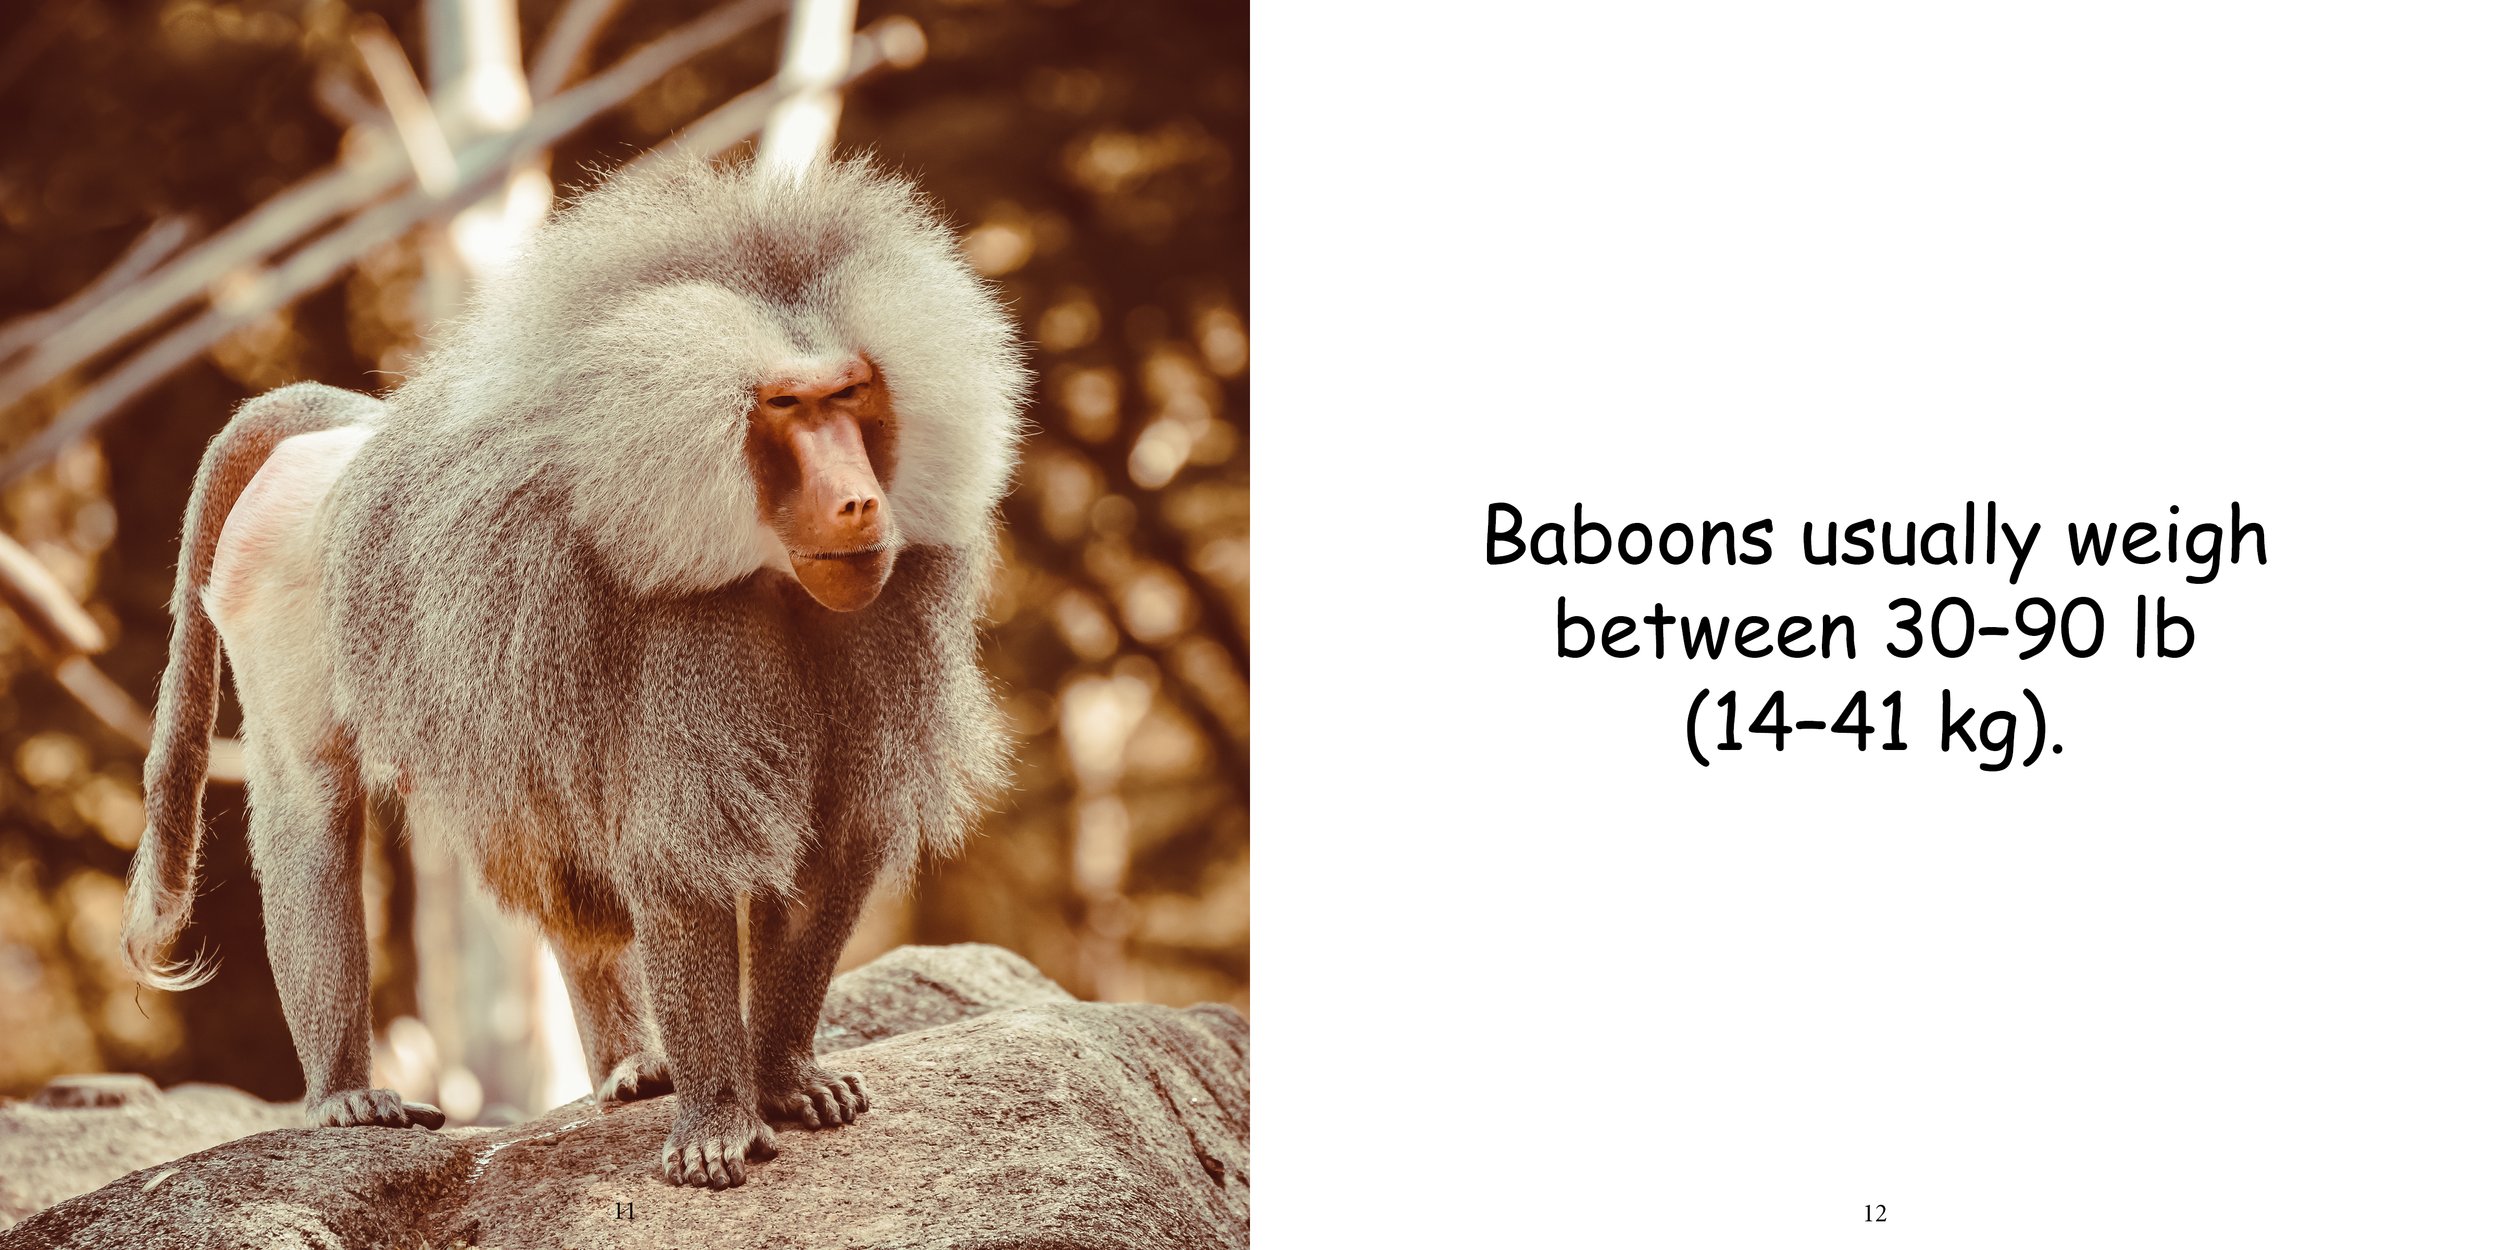 Everything about Baboons10.jpg